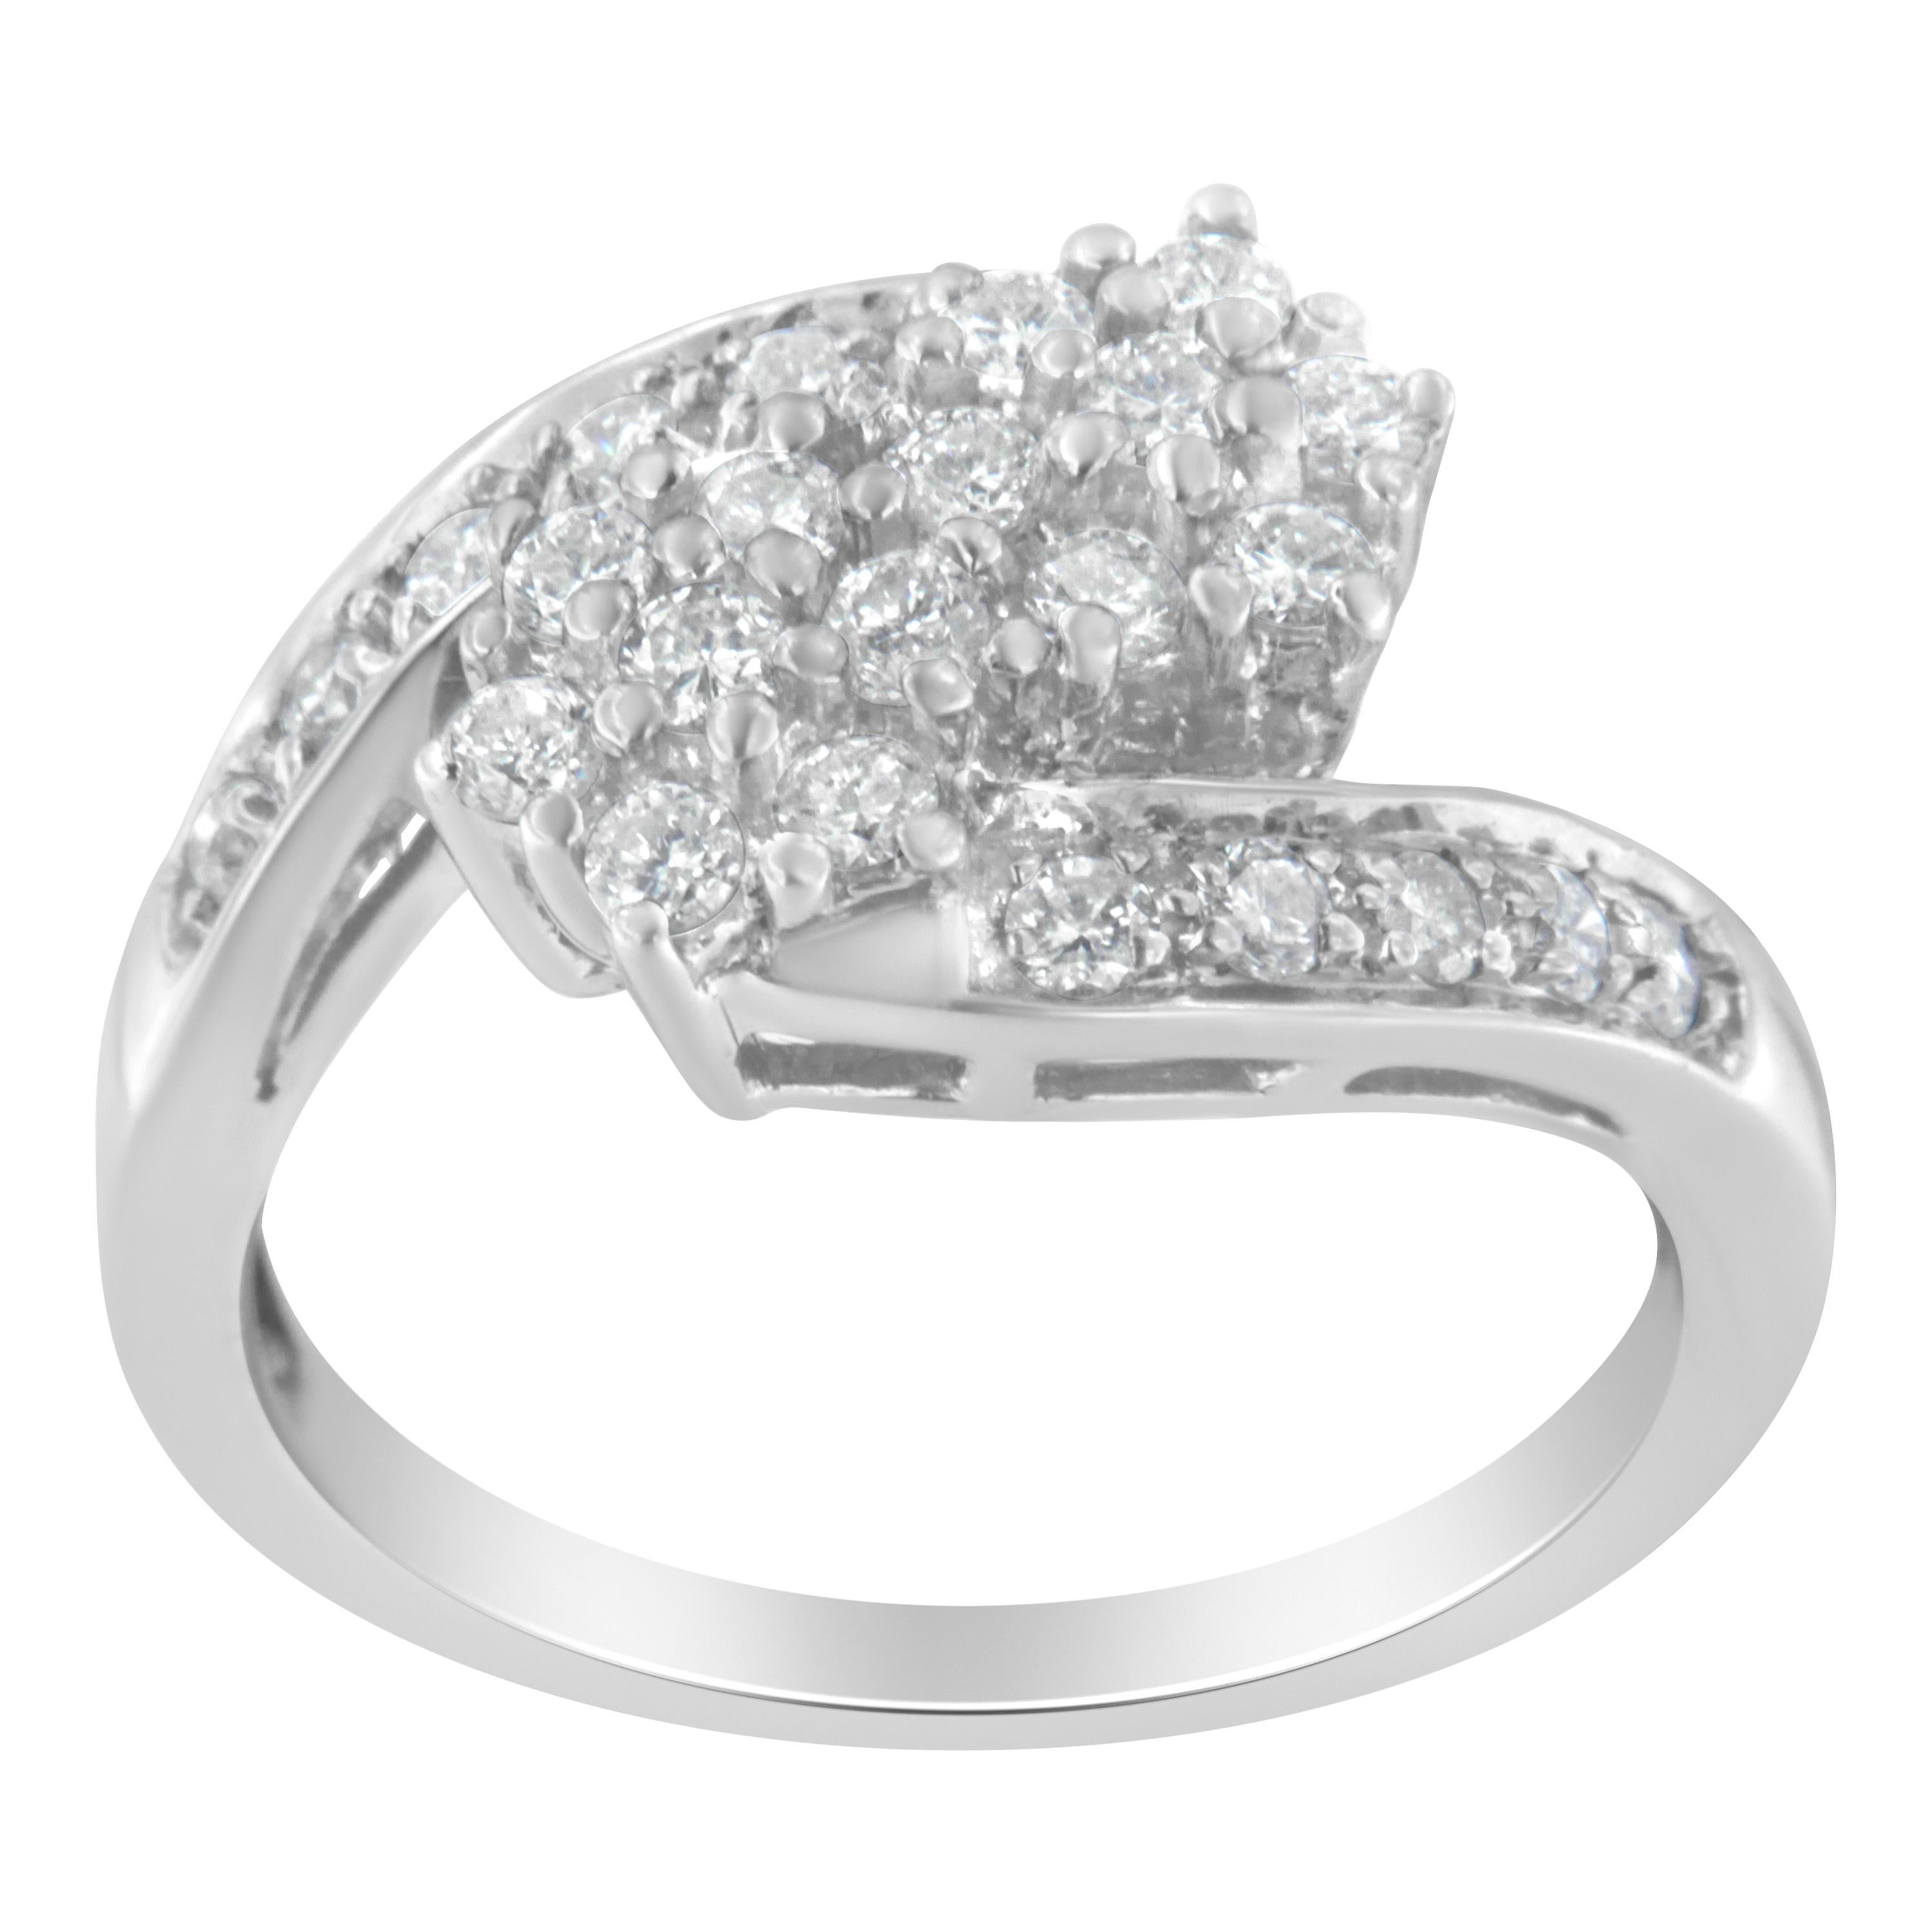 This stunning gold and diamond ring has a unique design, and beautiful, natural diamonds. The cluster ring has three rows of 24 round-cut diamonds set in lustrous 14k white gold. It has a total diamond weight of 7/8 ct. 

'Video Available Upon